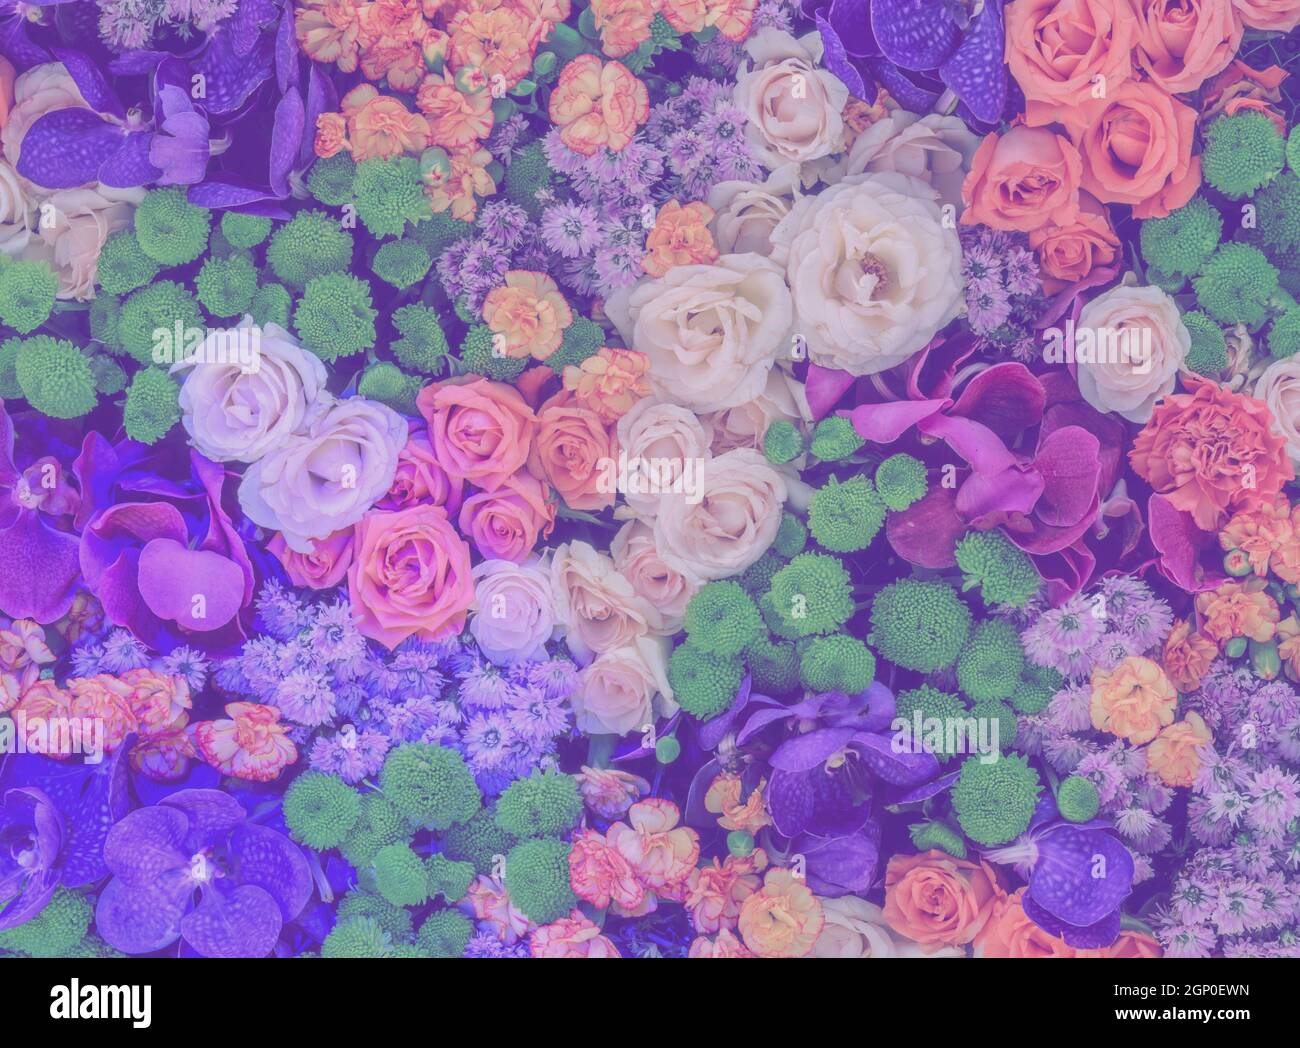 Colorful flower background of rose, chrysanthemum, carnation and orchid Stock Photo